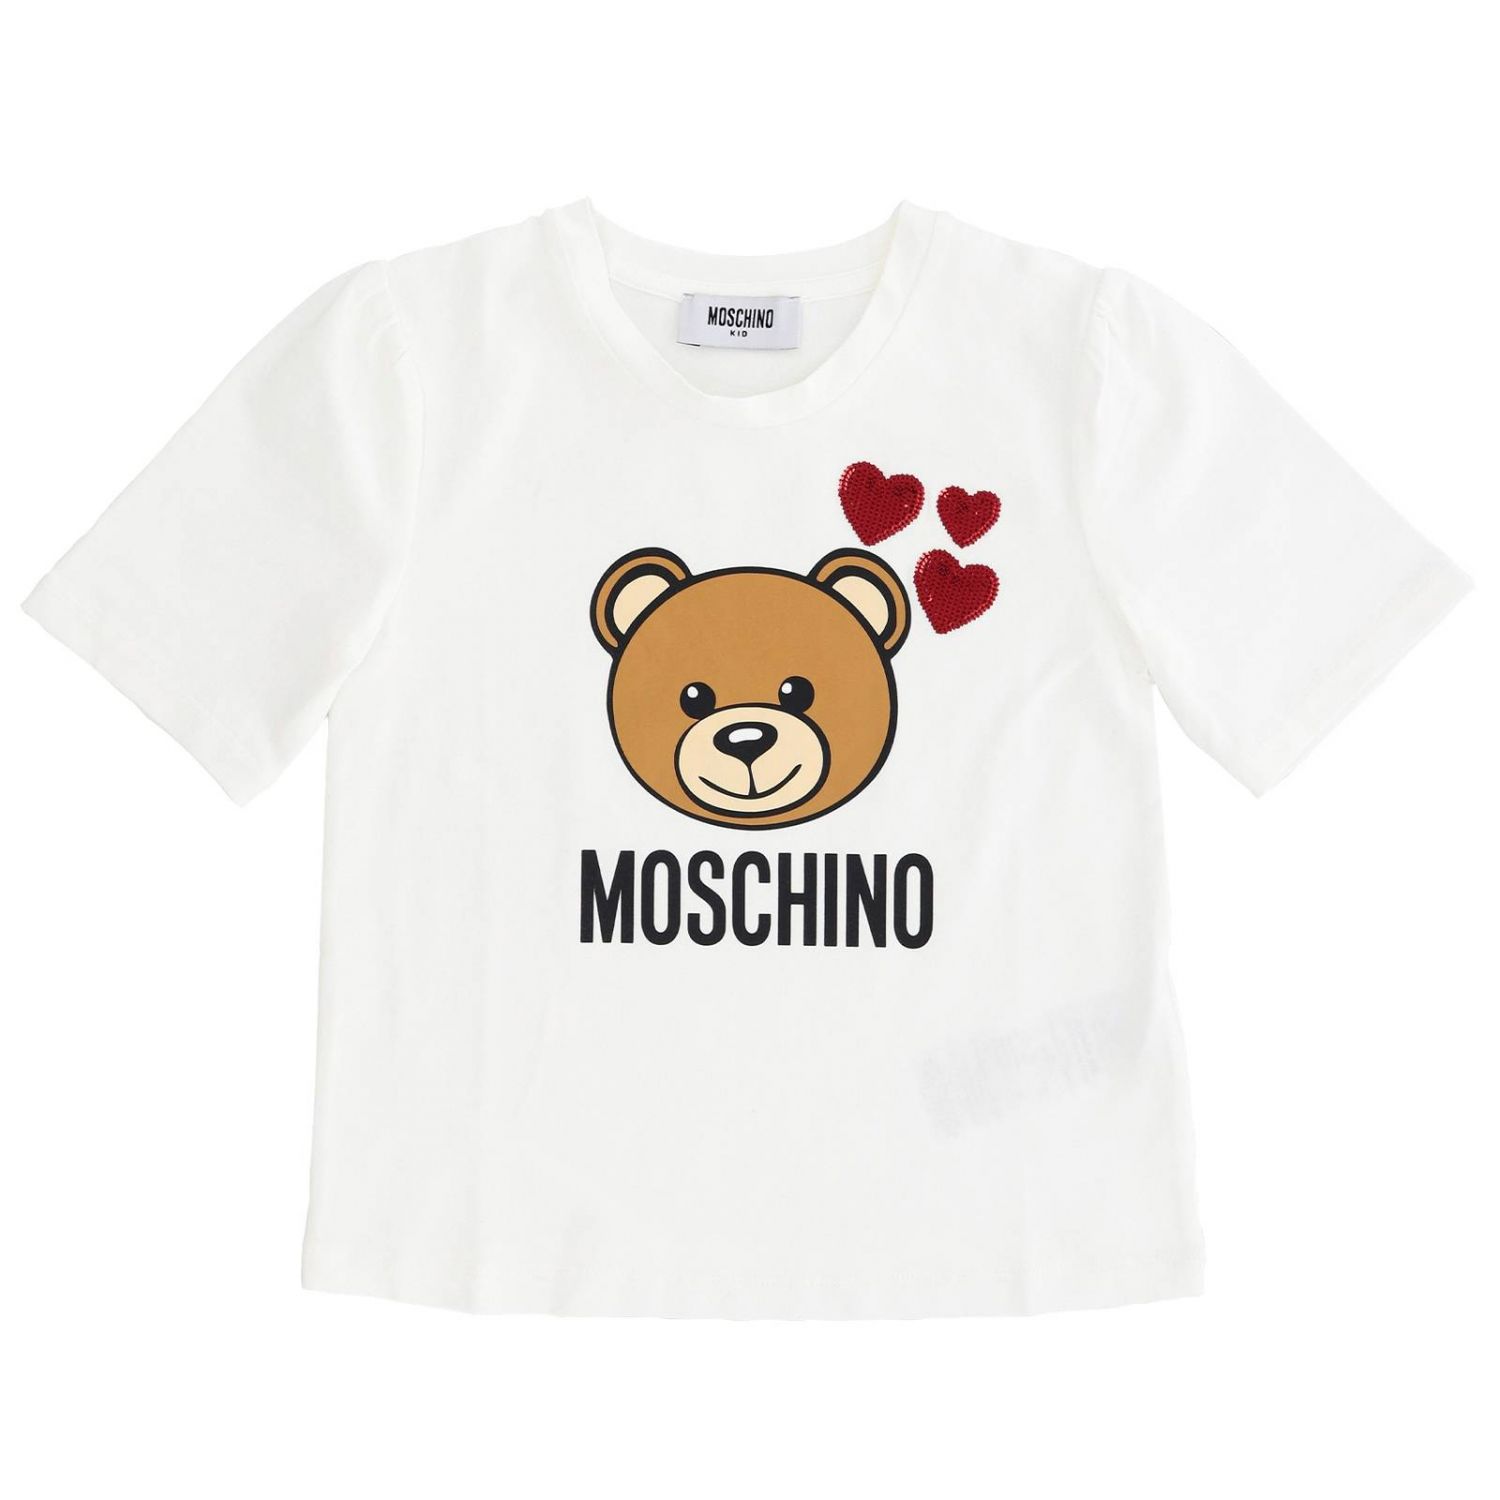 Moschino Kid Outlet: t-shirt for girl - White | Moschino Kid t-shirt ...